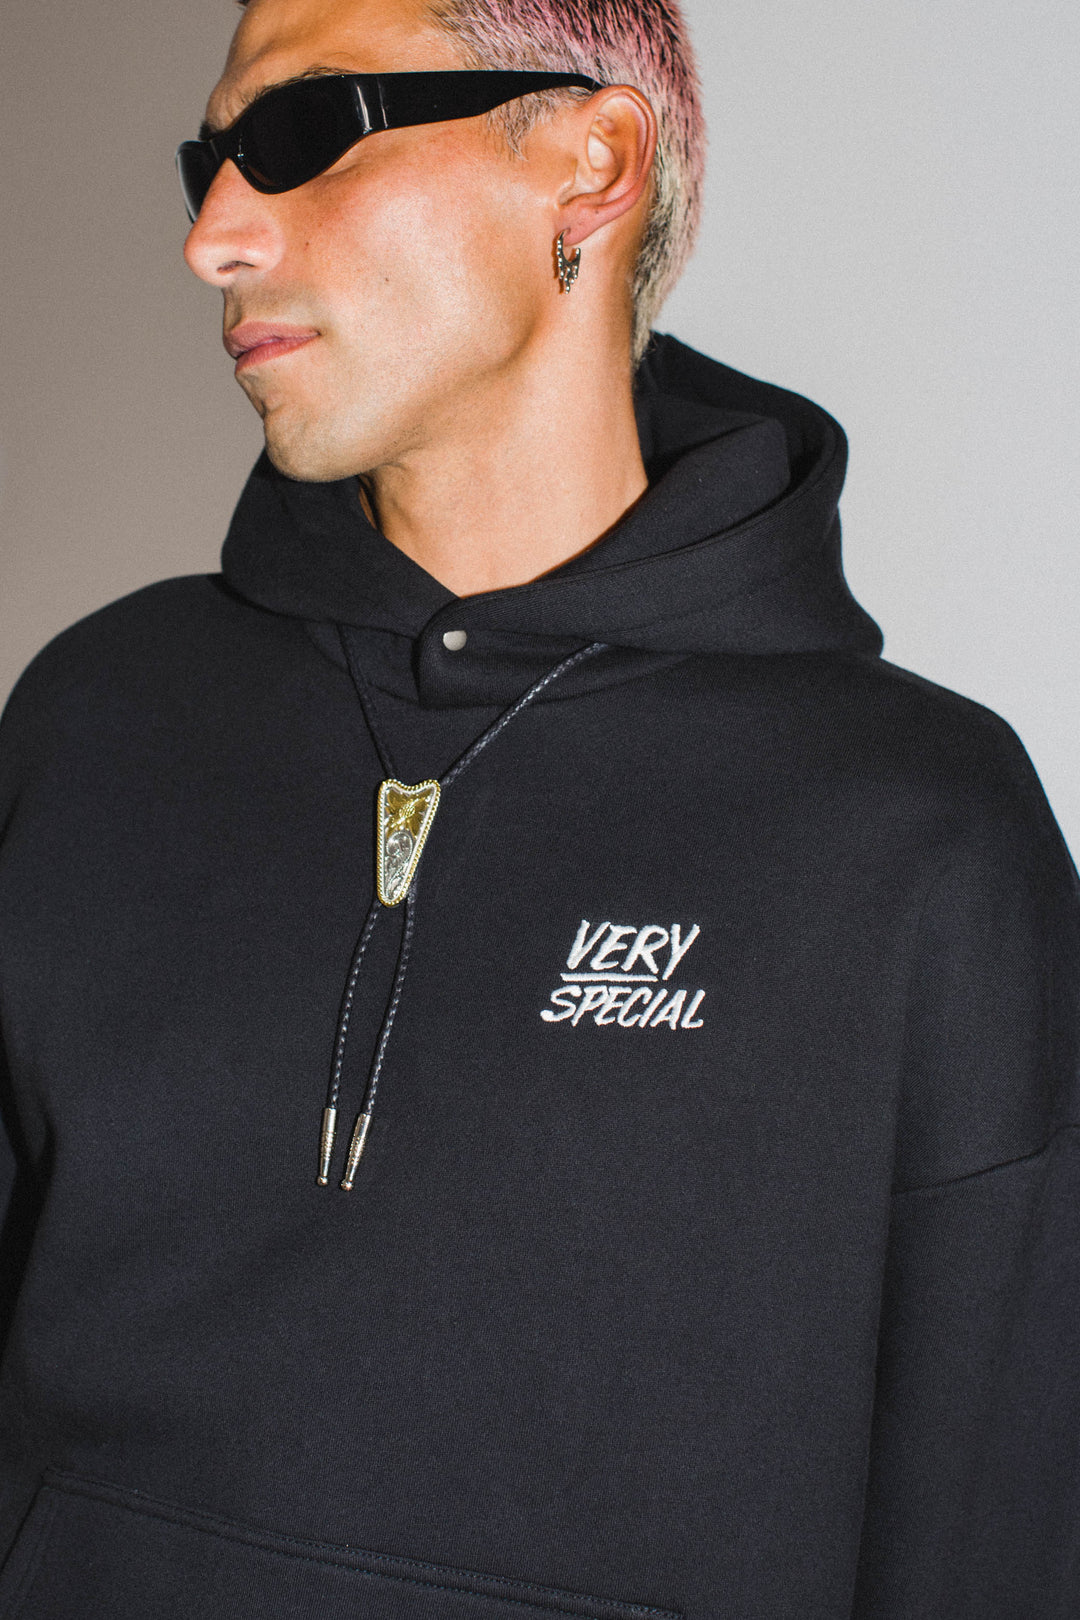 Something Very Special - Protect Your Energy - Poster Hoody